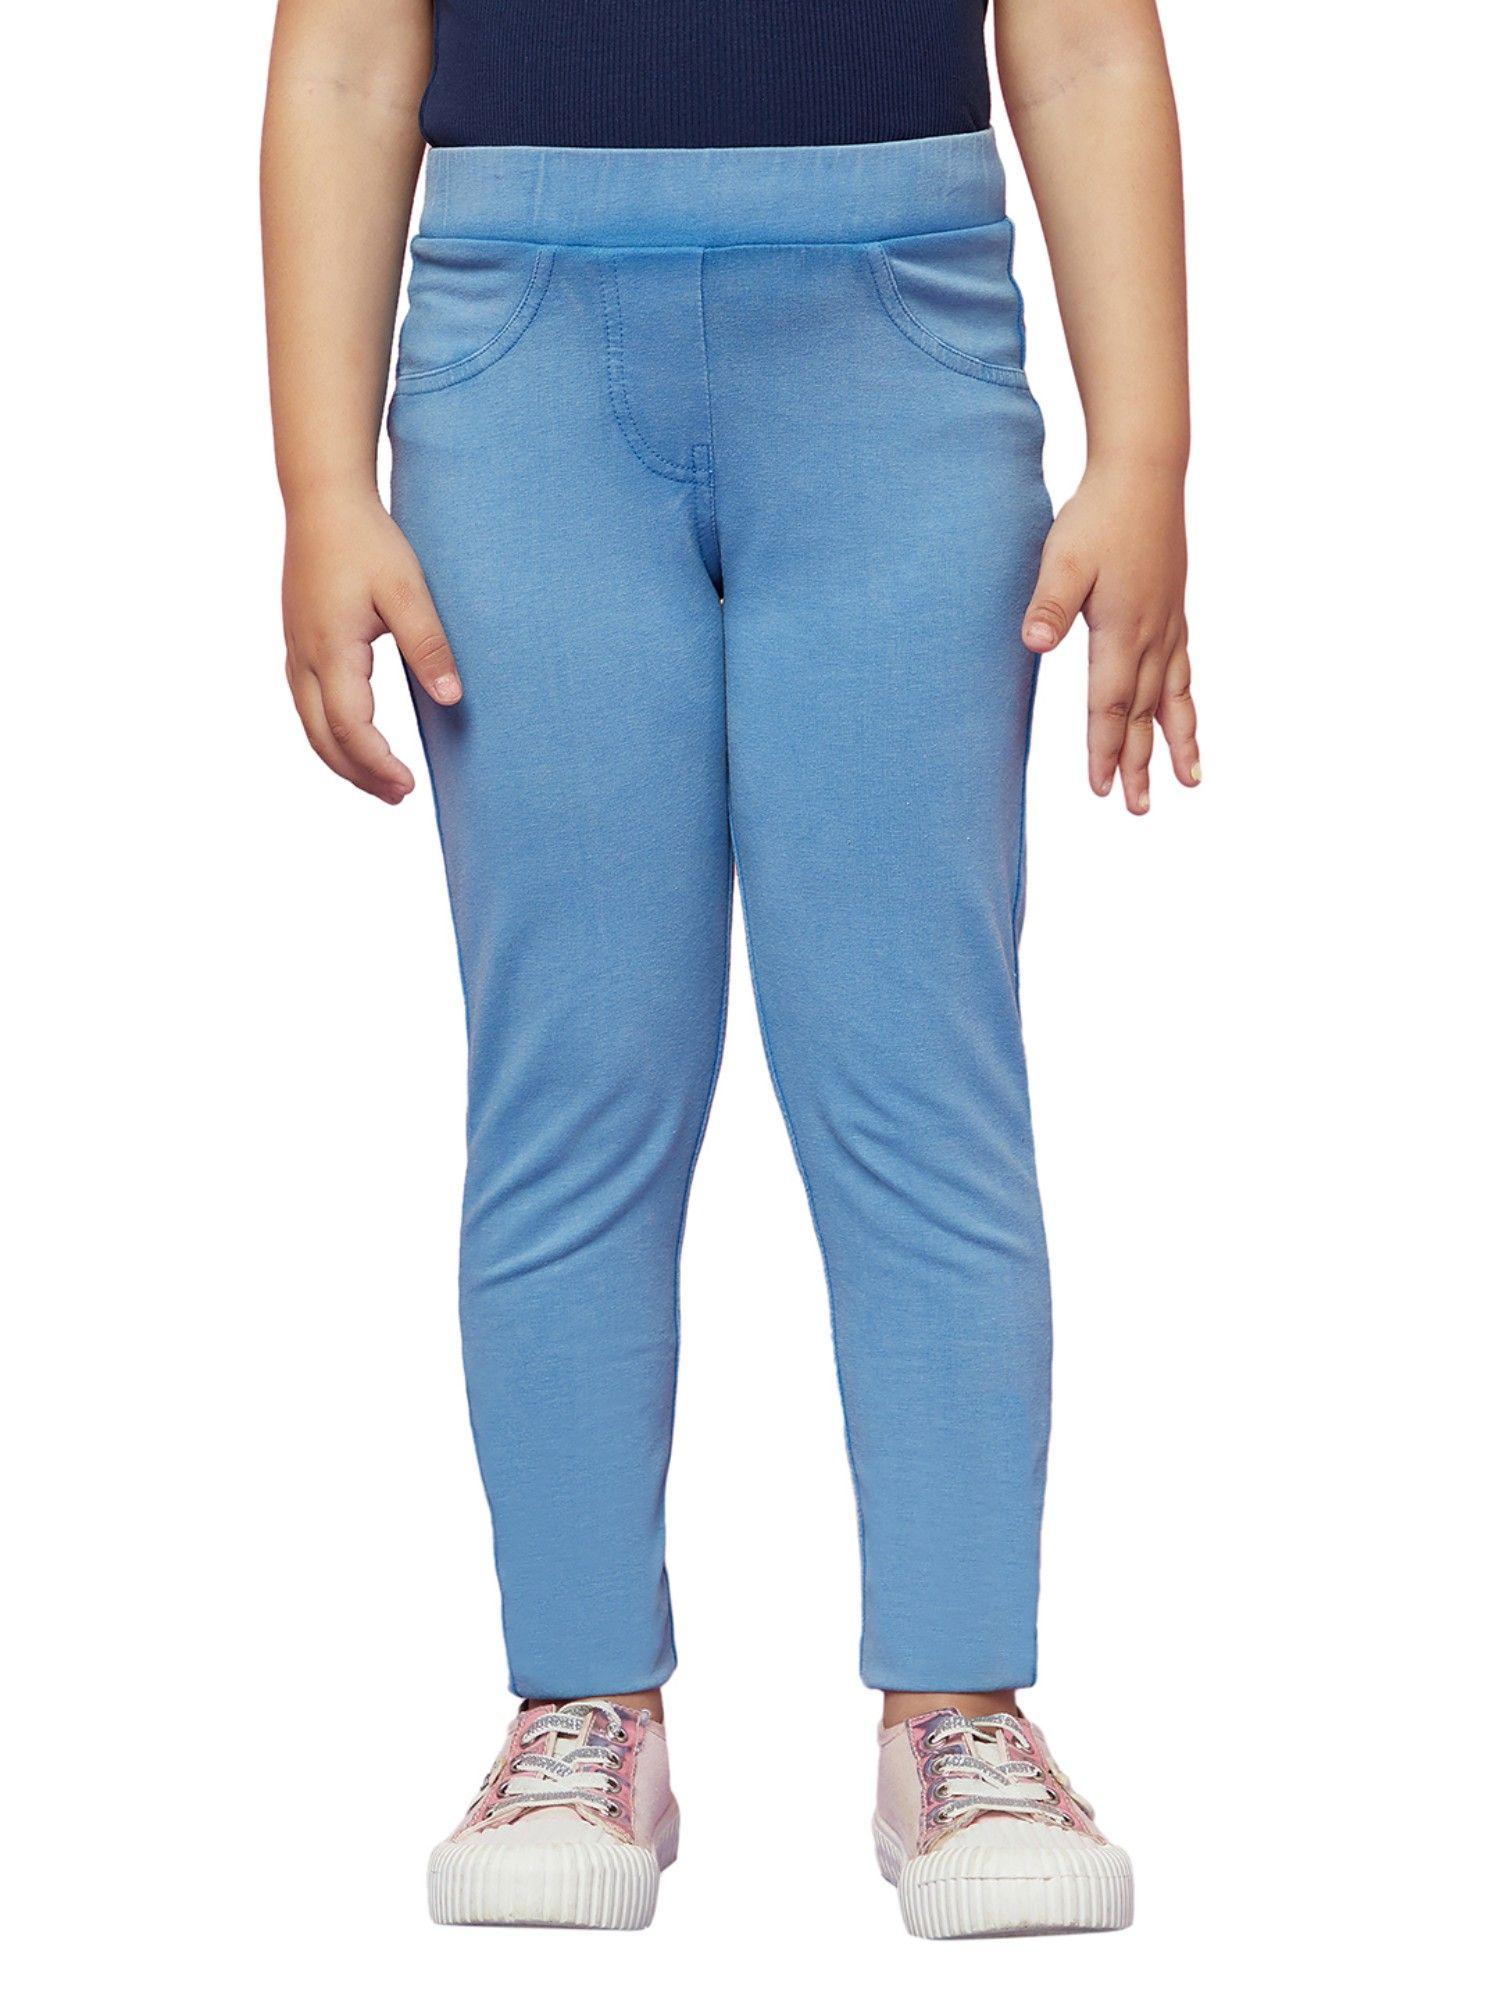 classic blue legging over washed blue